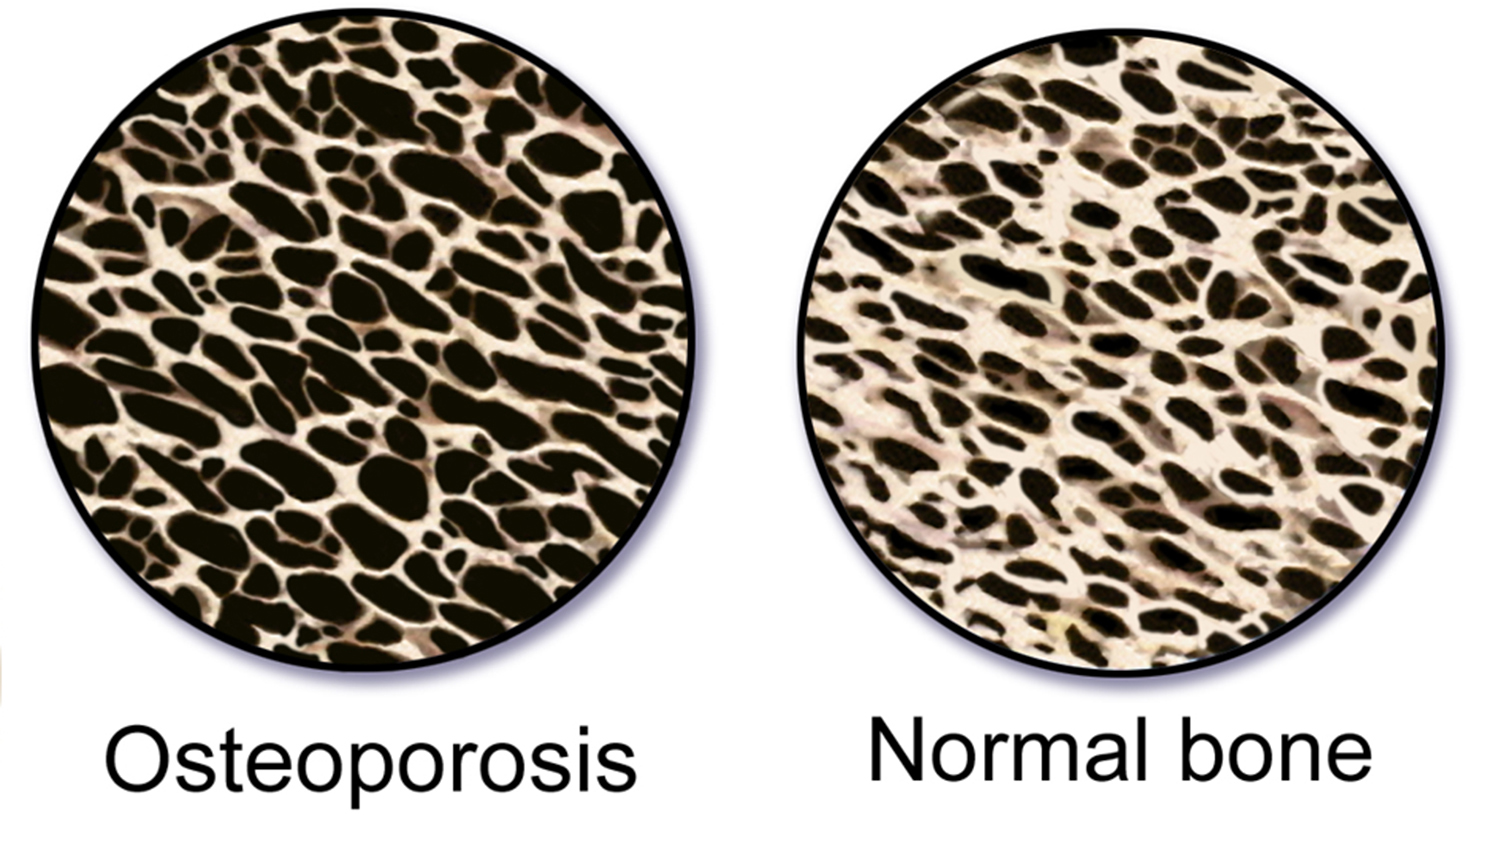 graphic of bone with osteoporosis compared to normal bone